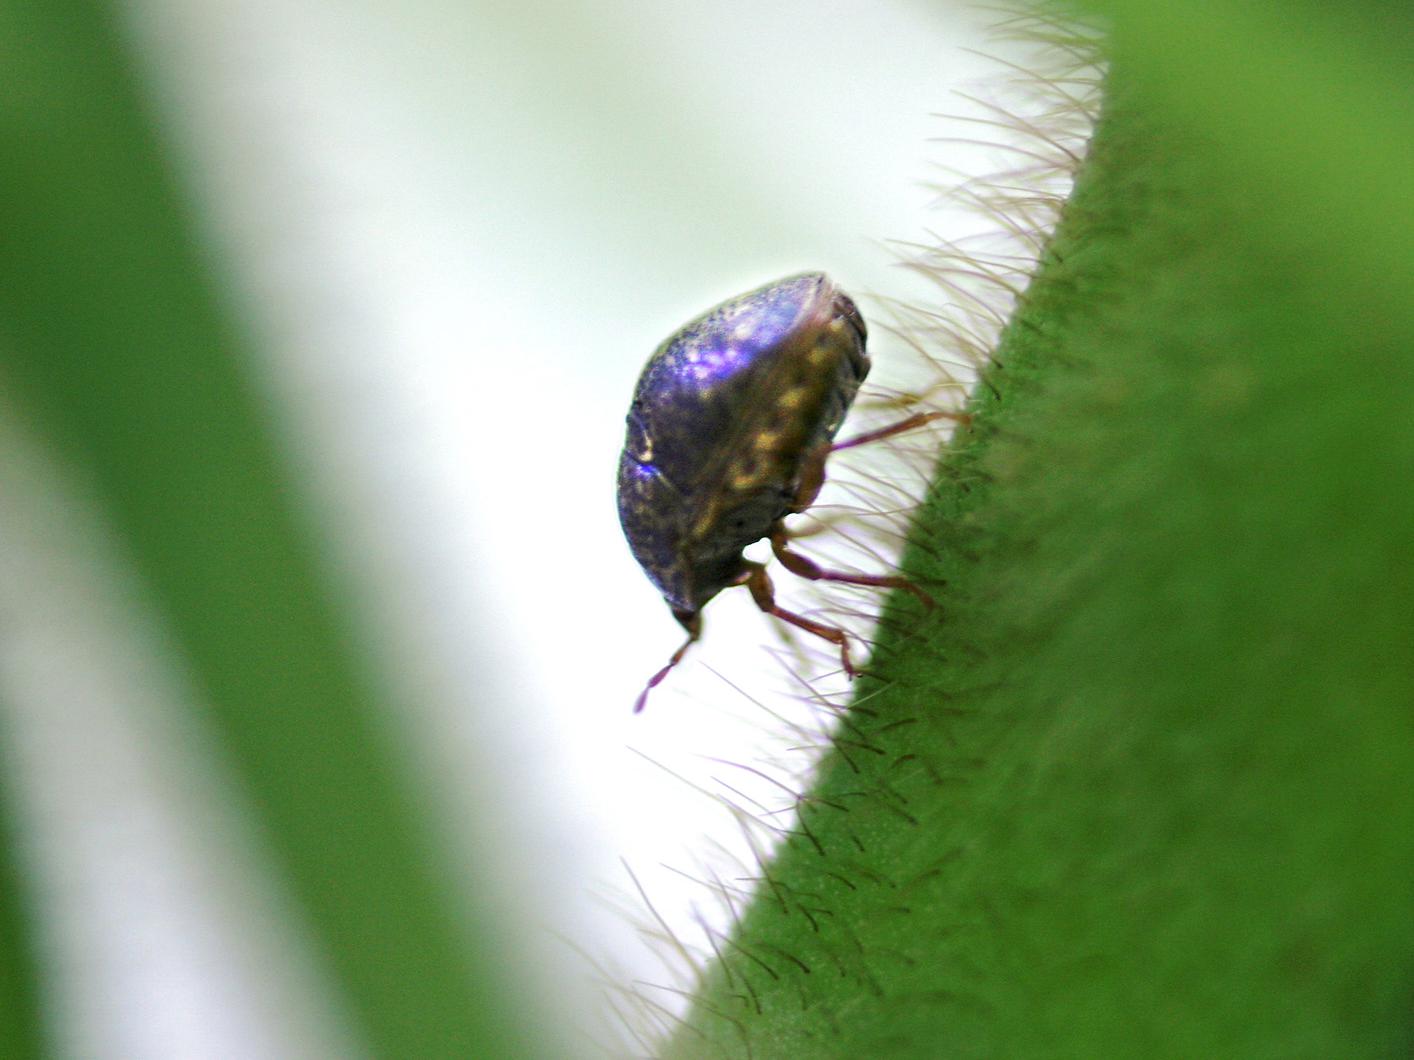 Kudzu bugs, an invasive soybean pest from Asia, were discovered mid-July in Vicksburg. Mississippi State University Extension Service entomologists are monitoring the state's soybean fields and say the insect can be controlled. (Photo by USDA-ARS /Richard Evans)